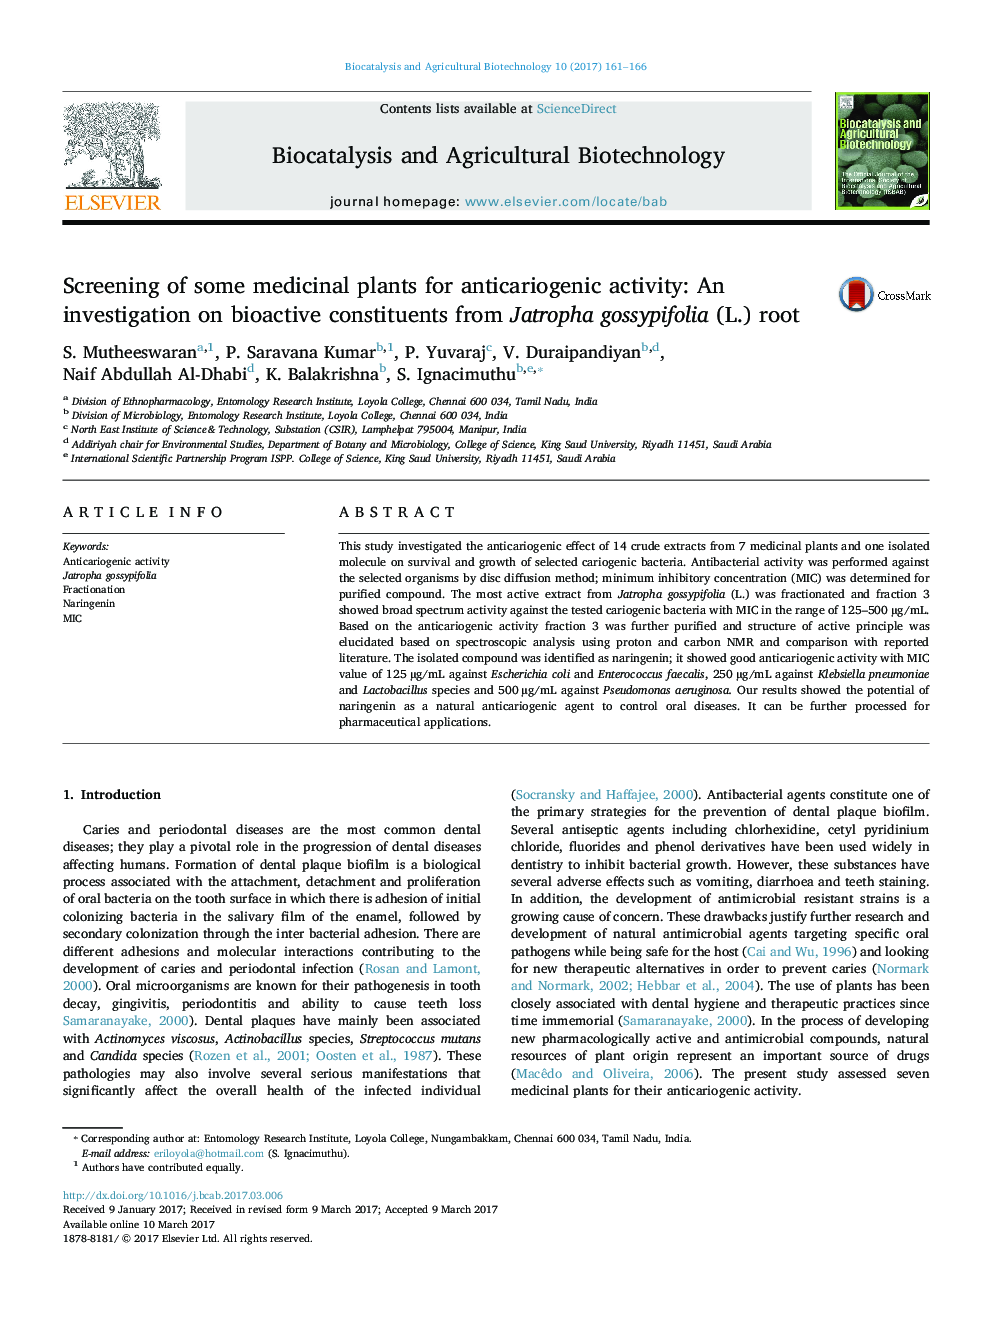 Screening of some medicinal plants for anticariogenic activity: An investigation on bioactive constituents from Jatropha gossypifolia (L.) root